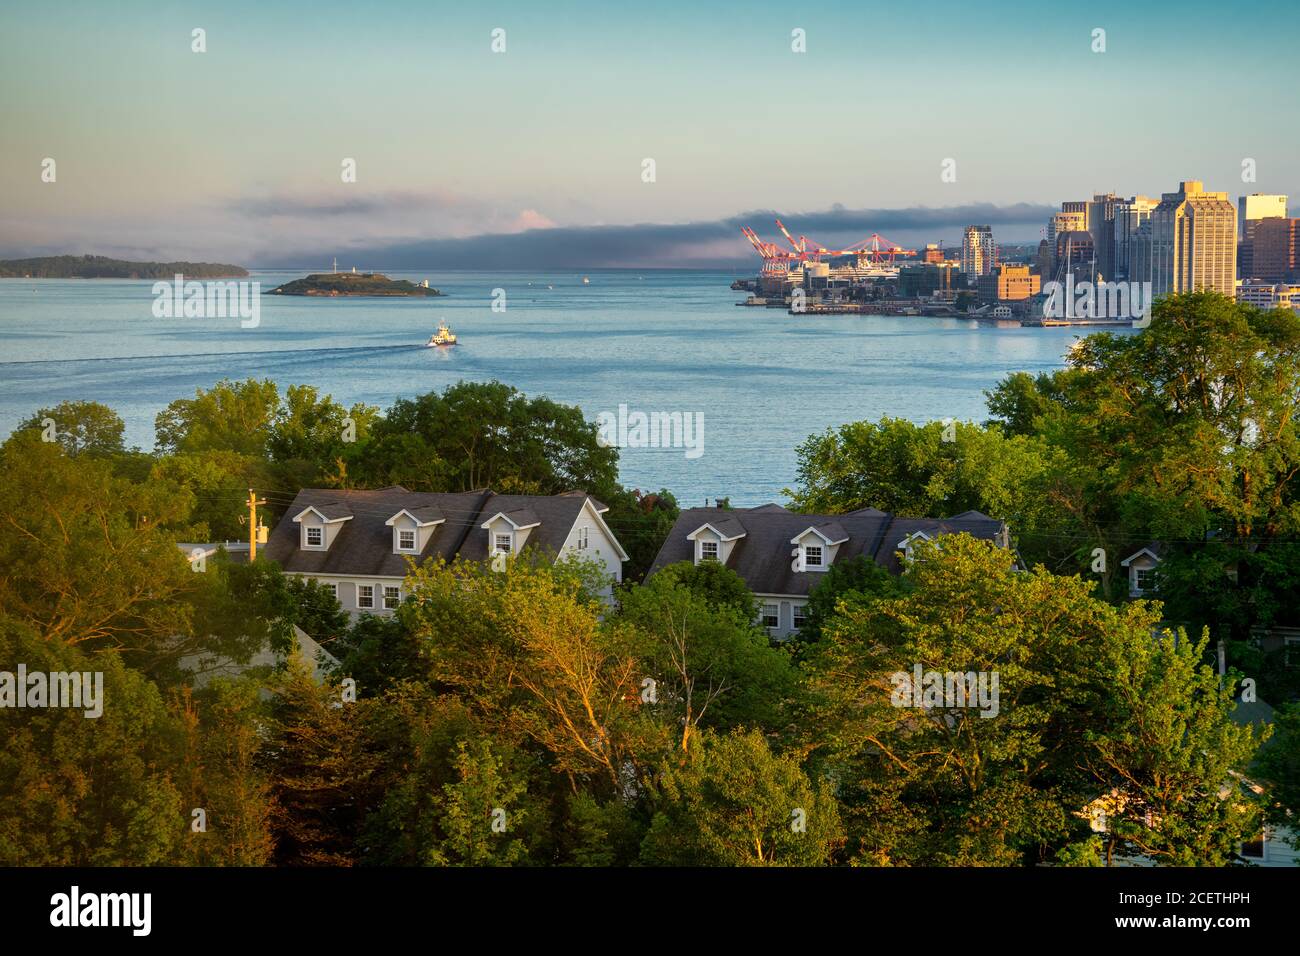 View of Halifax Harbour, Nova Scotia from the Dartmouth side of the harbor with views of George's Island and the waterfront of Halifax. Stock Photo